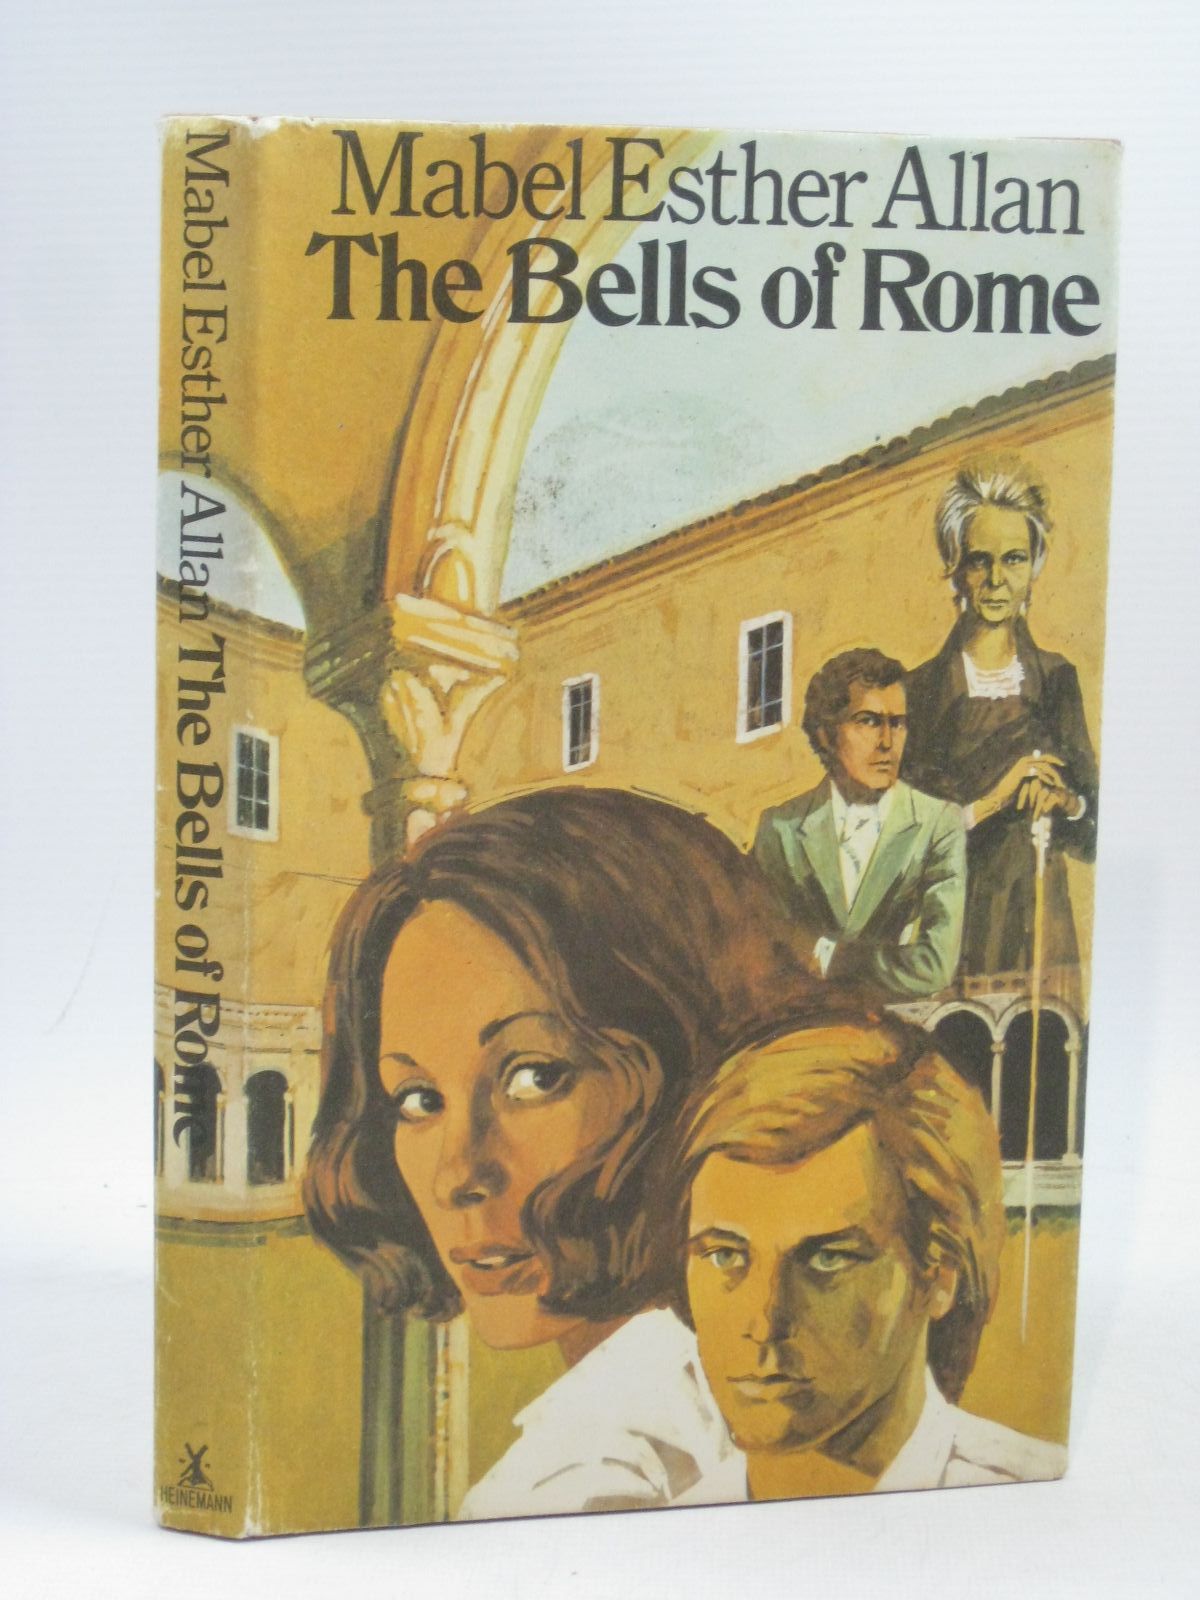 Cover of THE BELLS OF ROME by Mabel Esther Allan